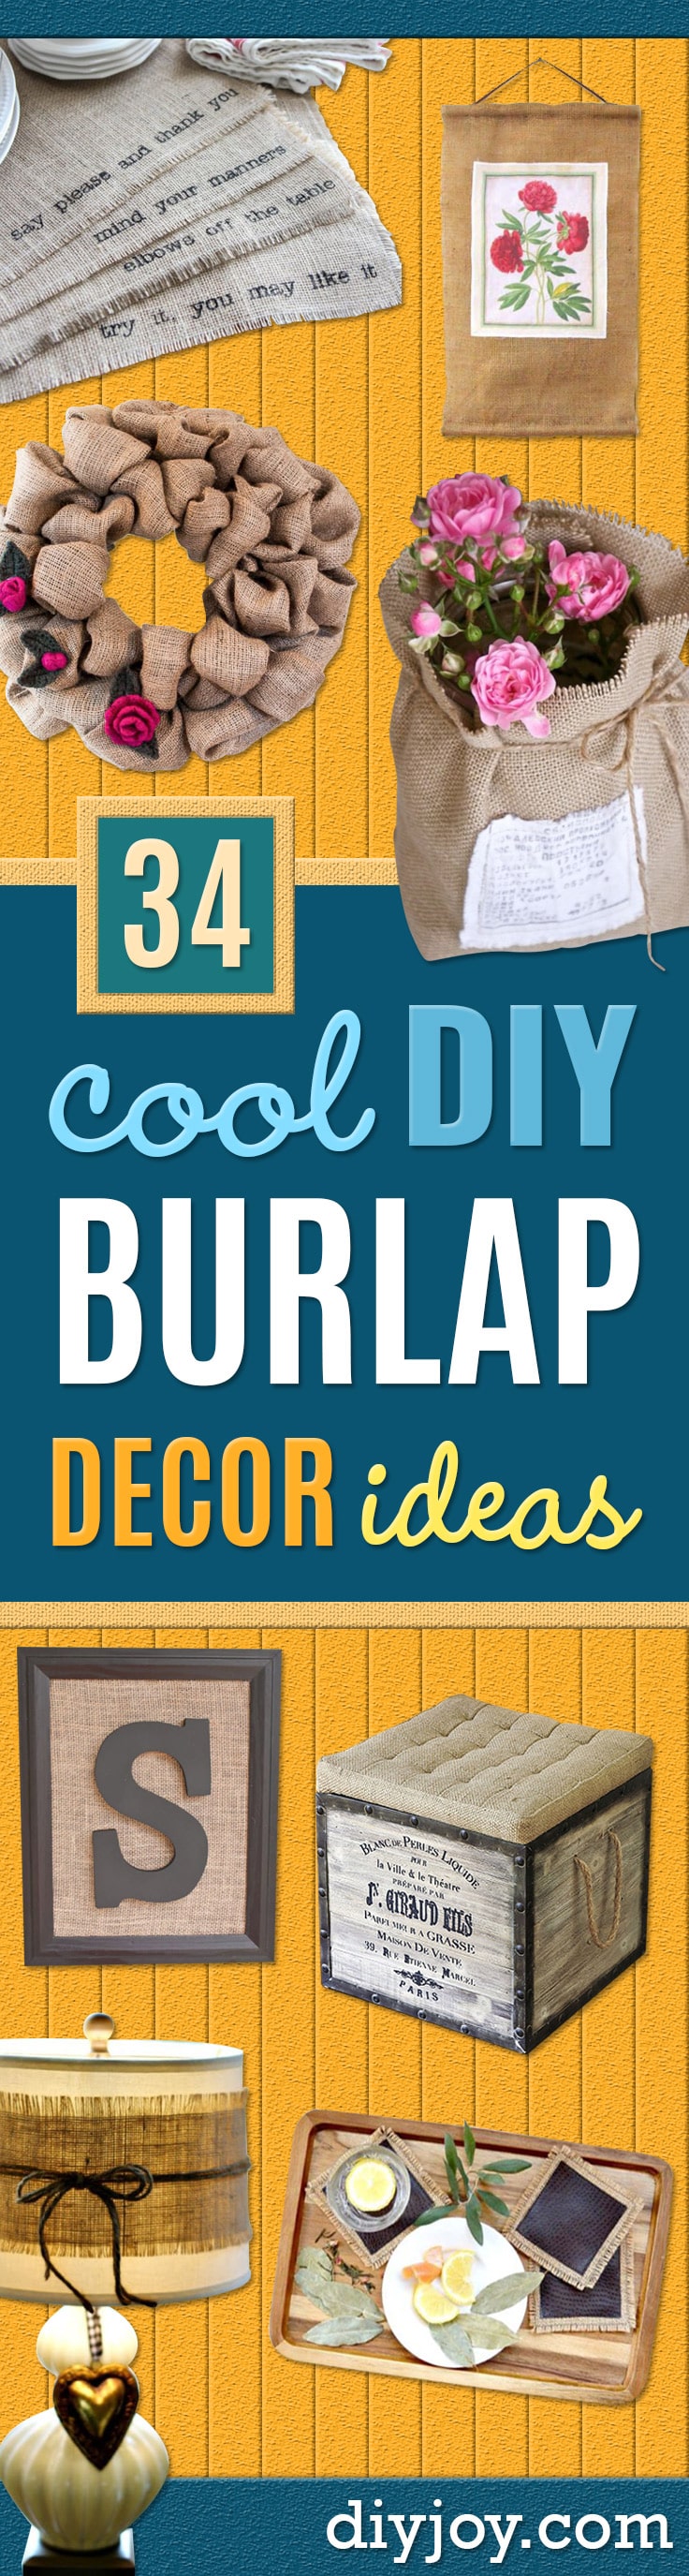 DIY Burlap Ideas - Burlap Furniture, Home Decor and Crafts - Banners and Buntings, Wall Art, Ottoman from Coffee Sacks, Wreath, Centerpieces and Table Runner - Kitchen, Bedroom, Living Room, Bathroom Ideas - Shabby Chic Craft Projects and DIY Wedding Decor http://diyjoy.com/diy-burlap-decor-ideas